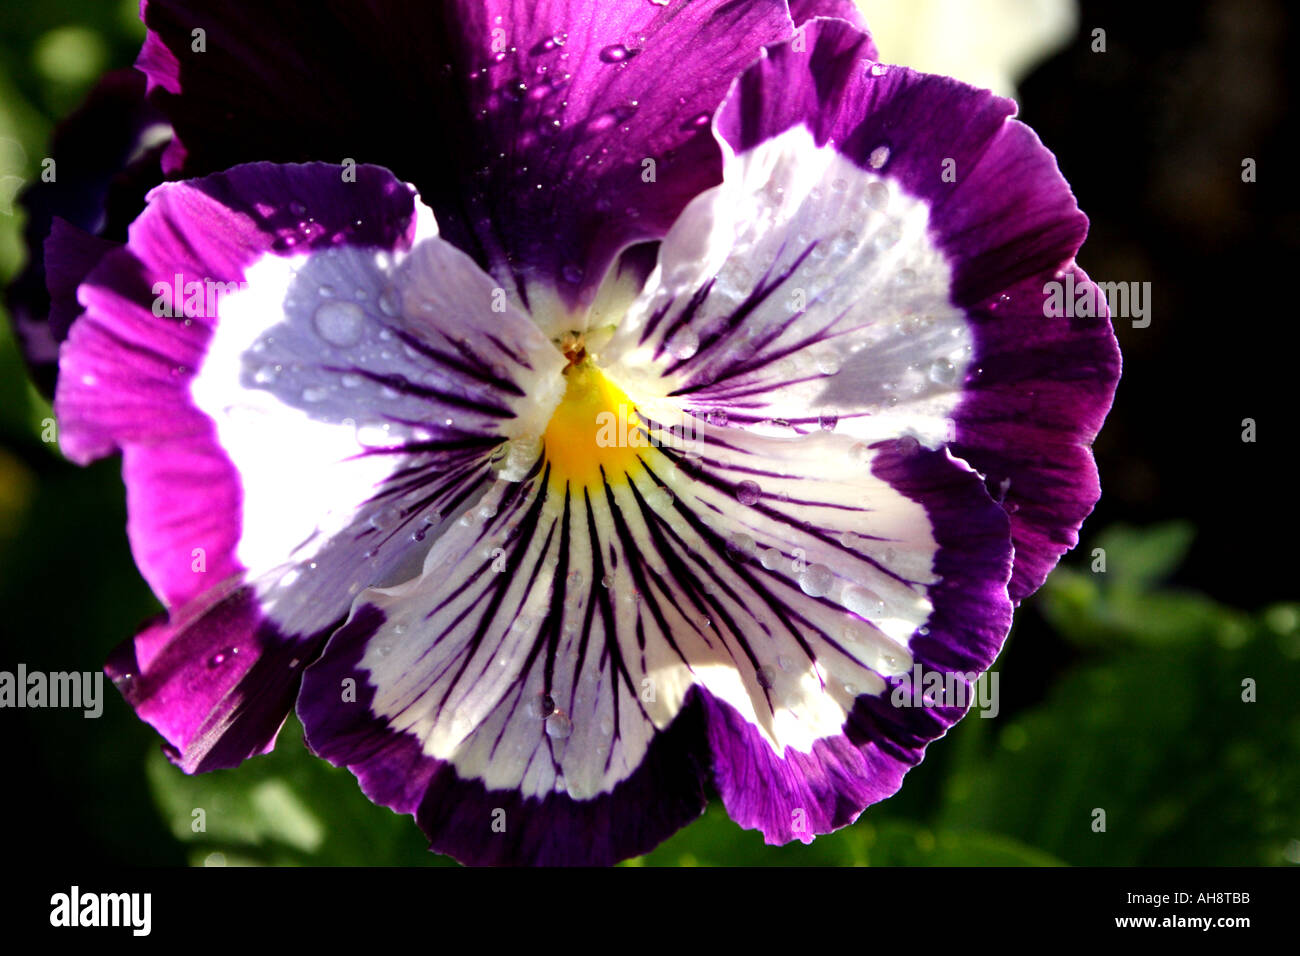 A PURPLE AND WHITE PANSY BAPD 2684 Stock Photo